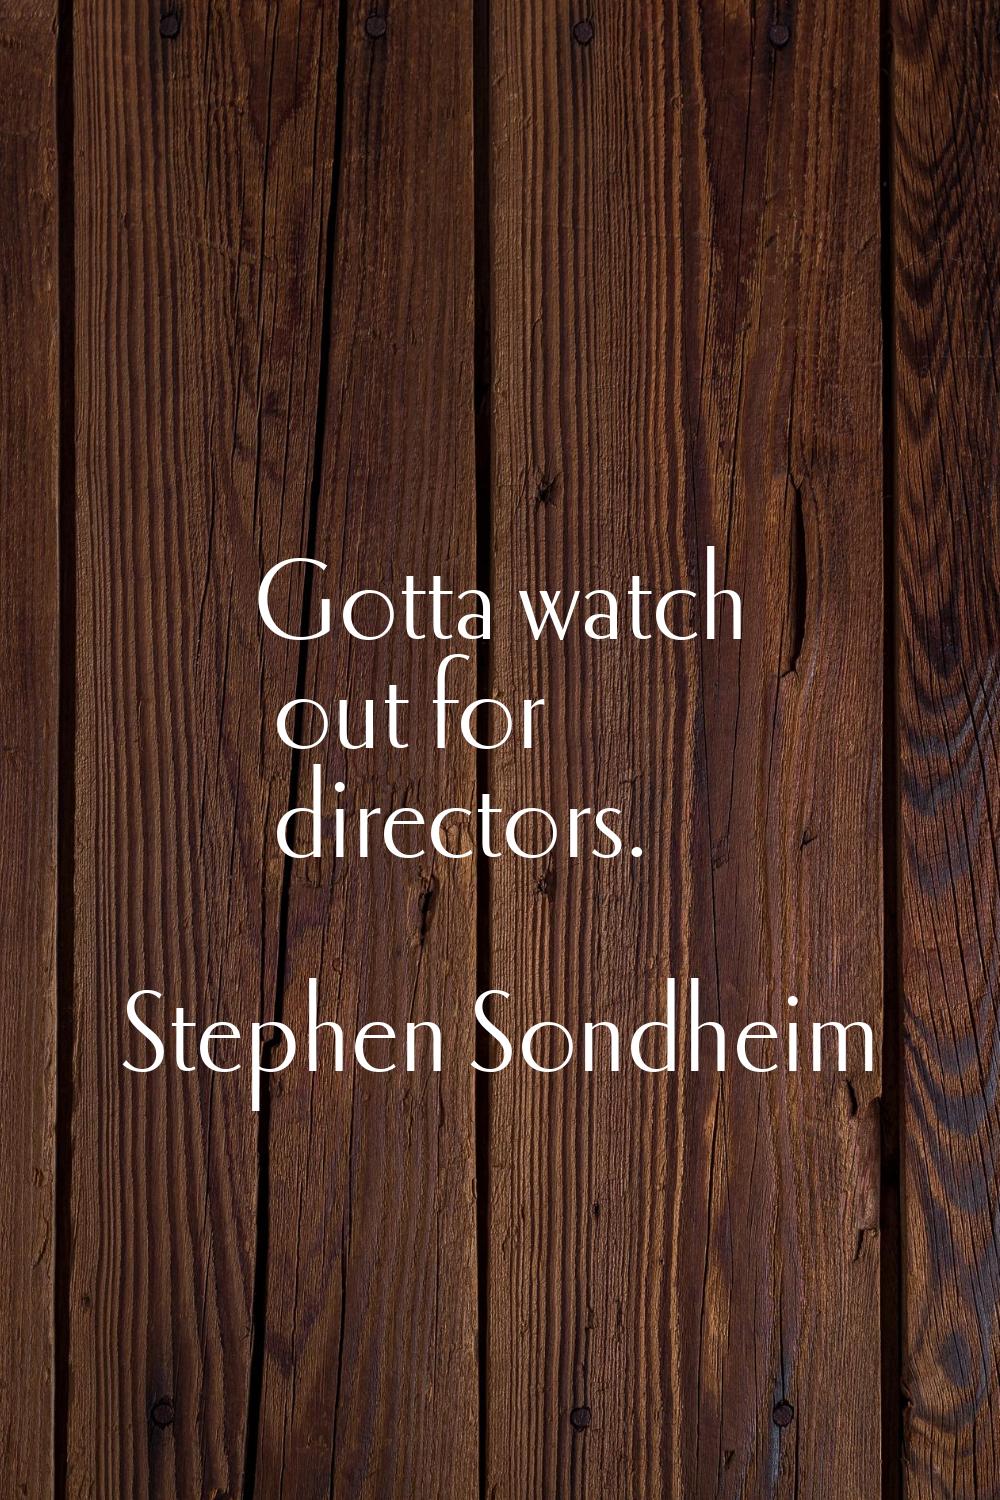 Gotta watch out for directors.